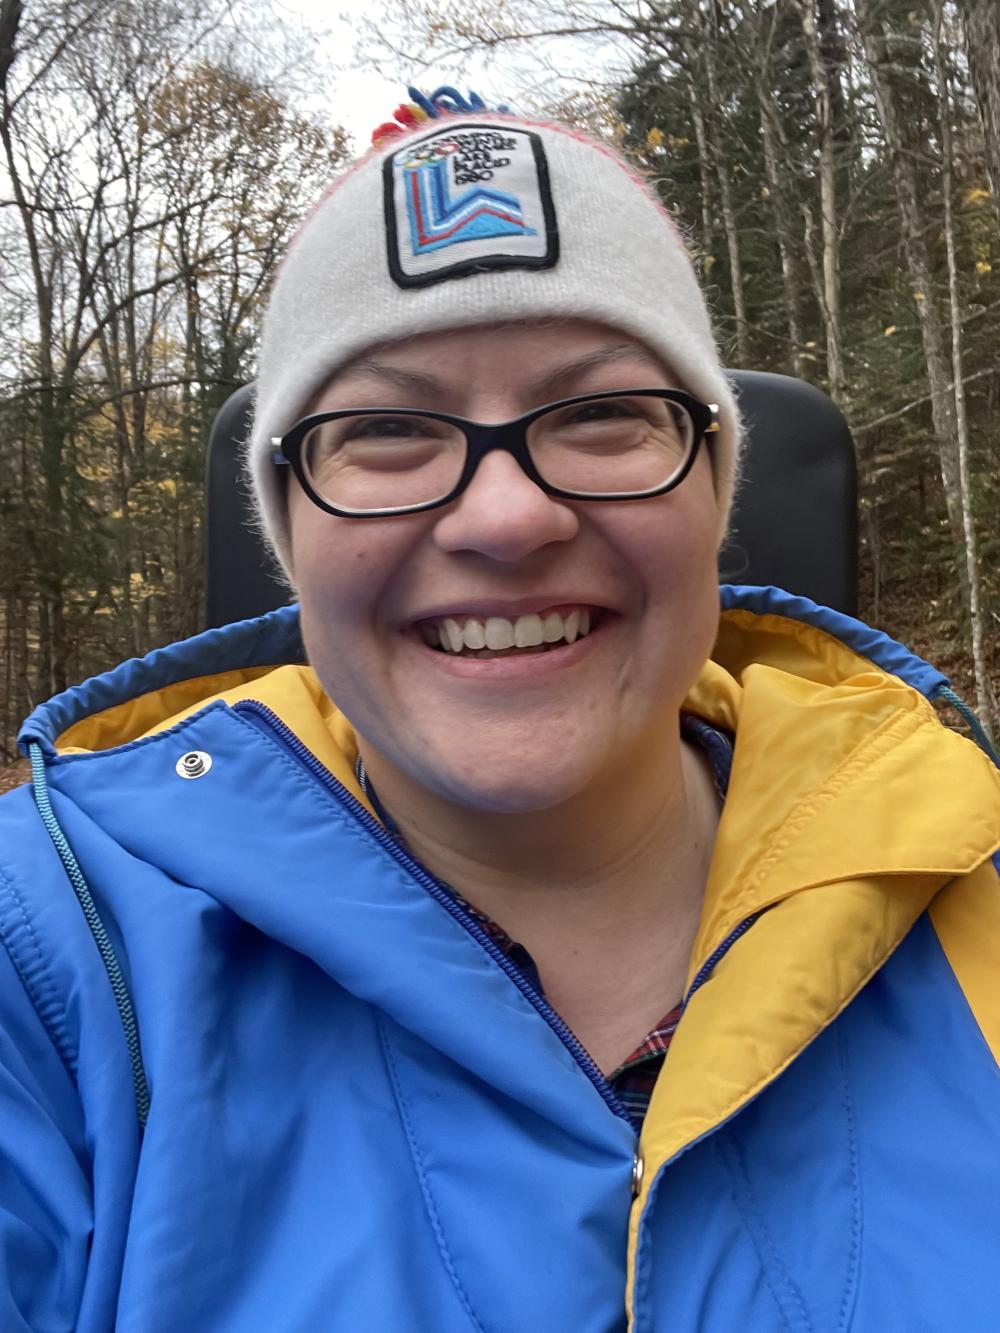 A woman in a bright blue and yellow parka and 1980 Lake Placid Olympic winter hat grins on a ride.